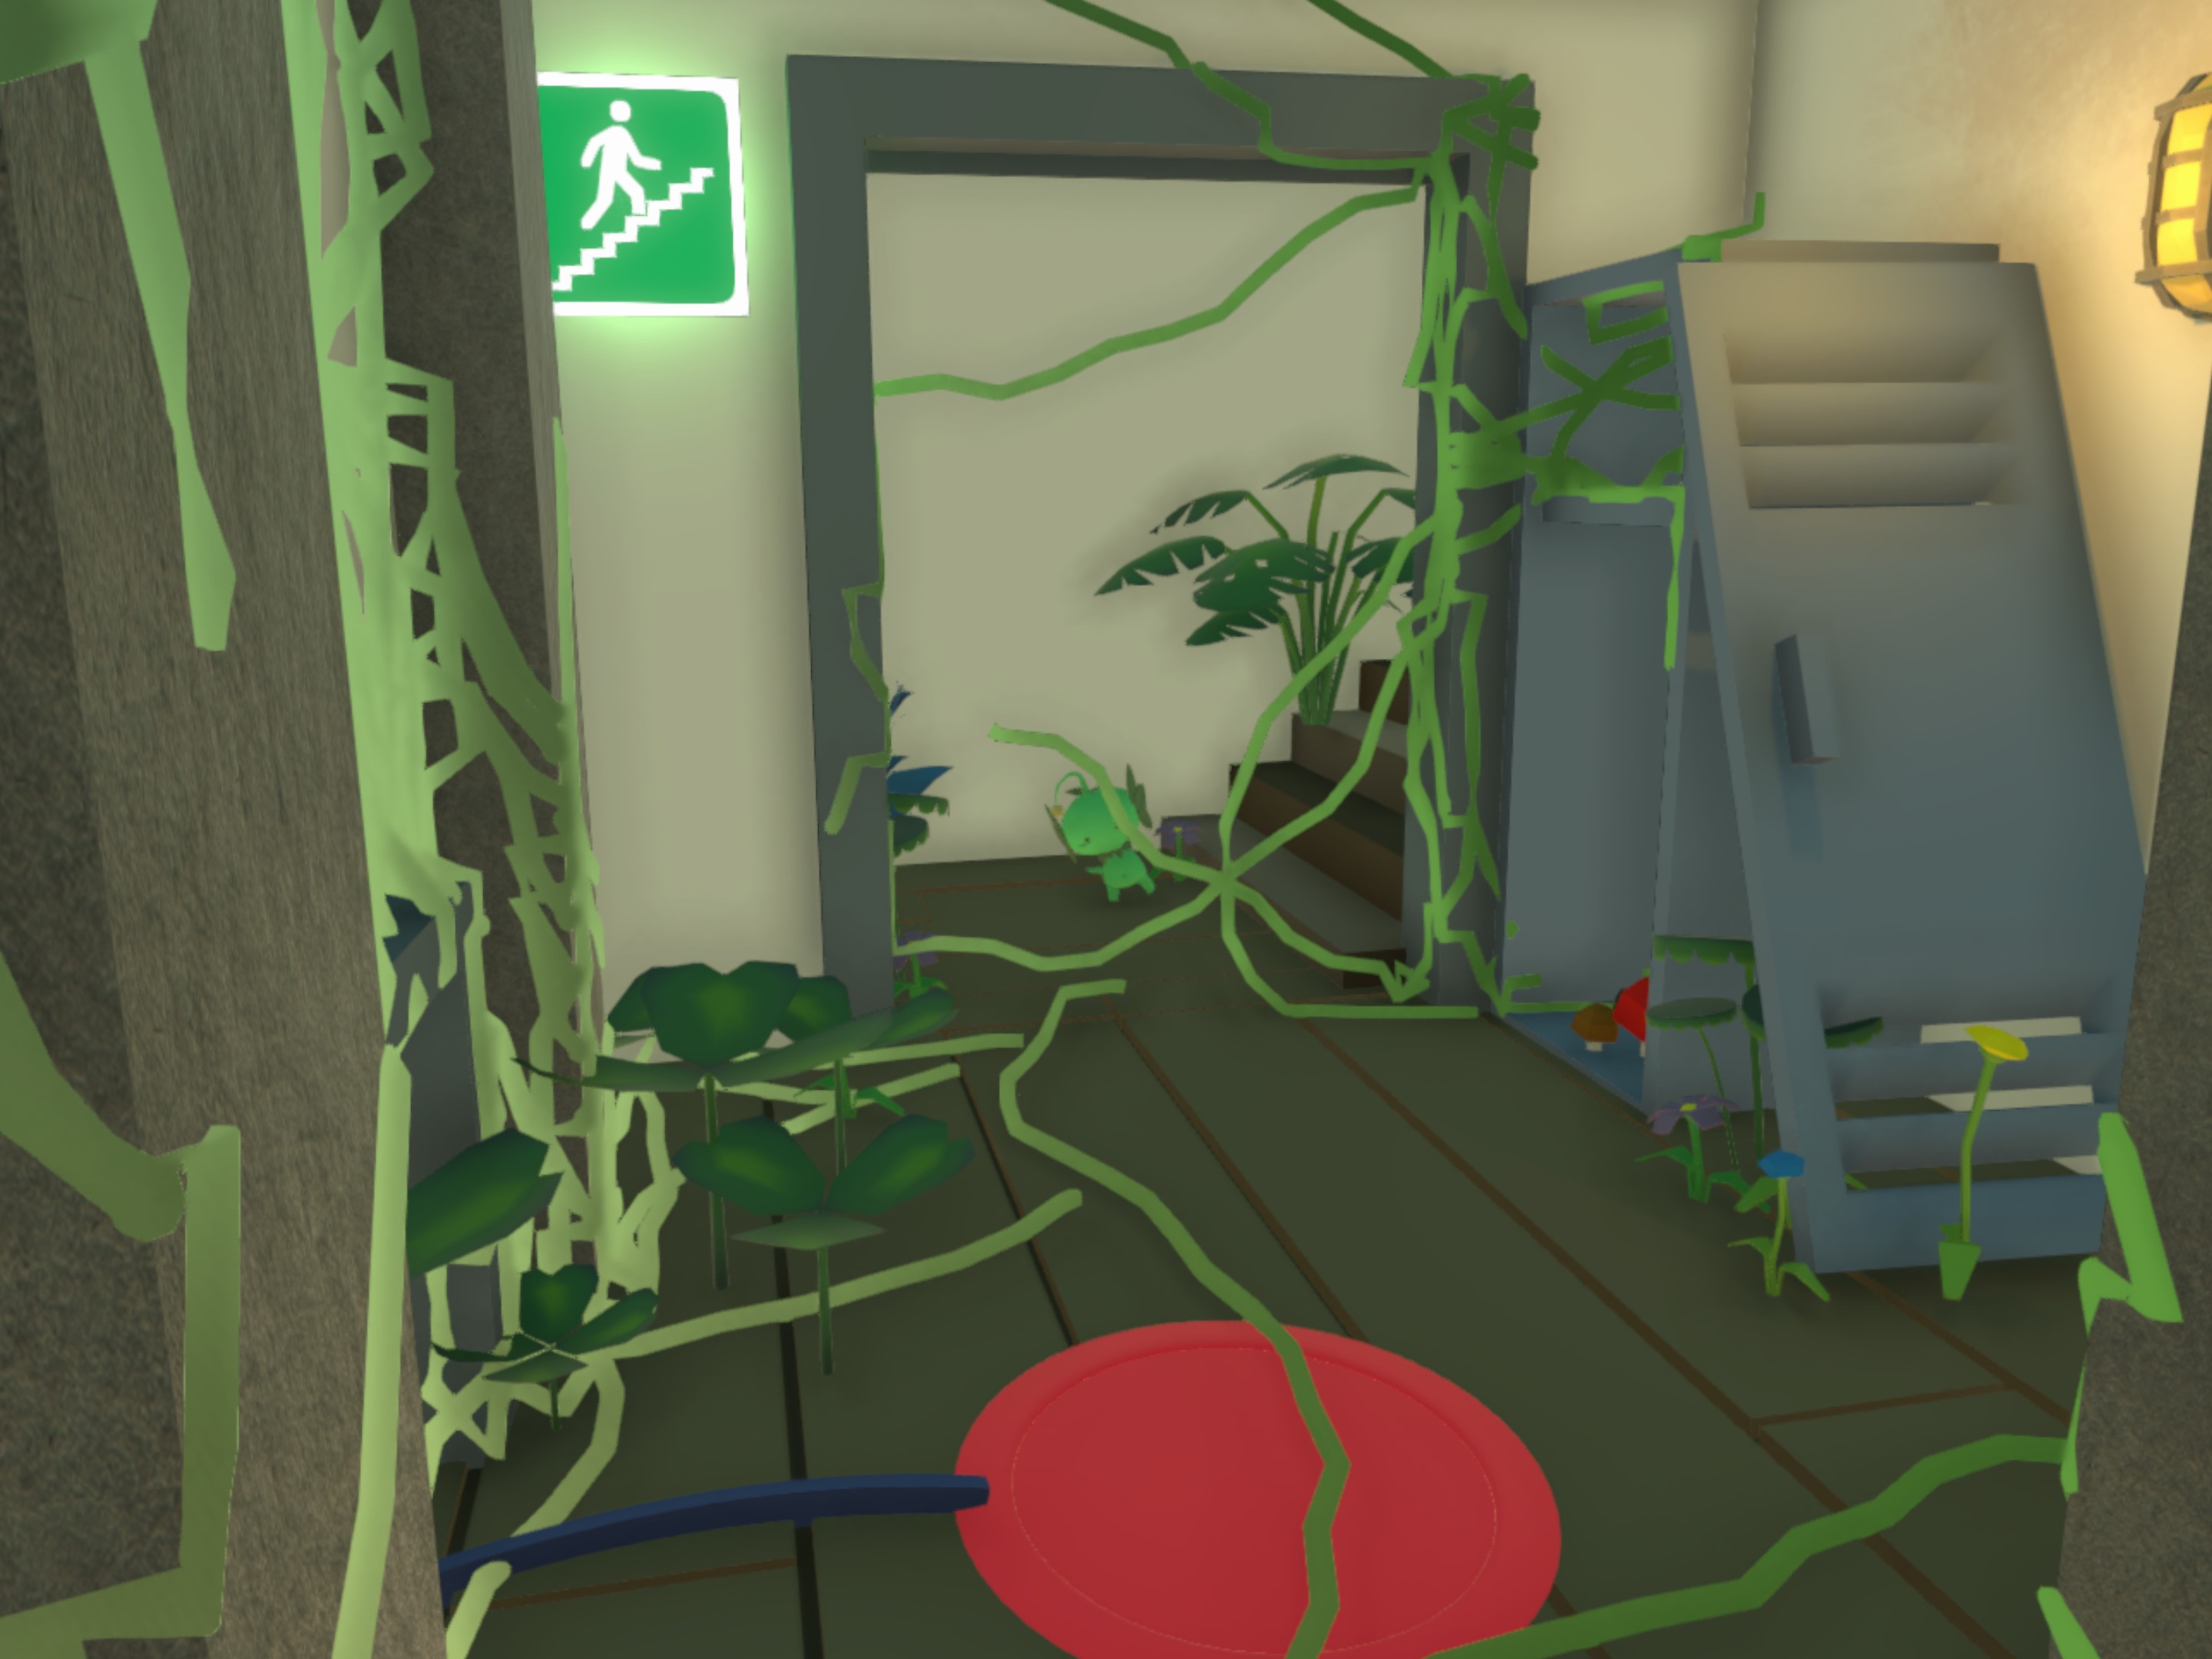 A screenshot of the game In Bloom.